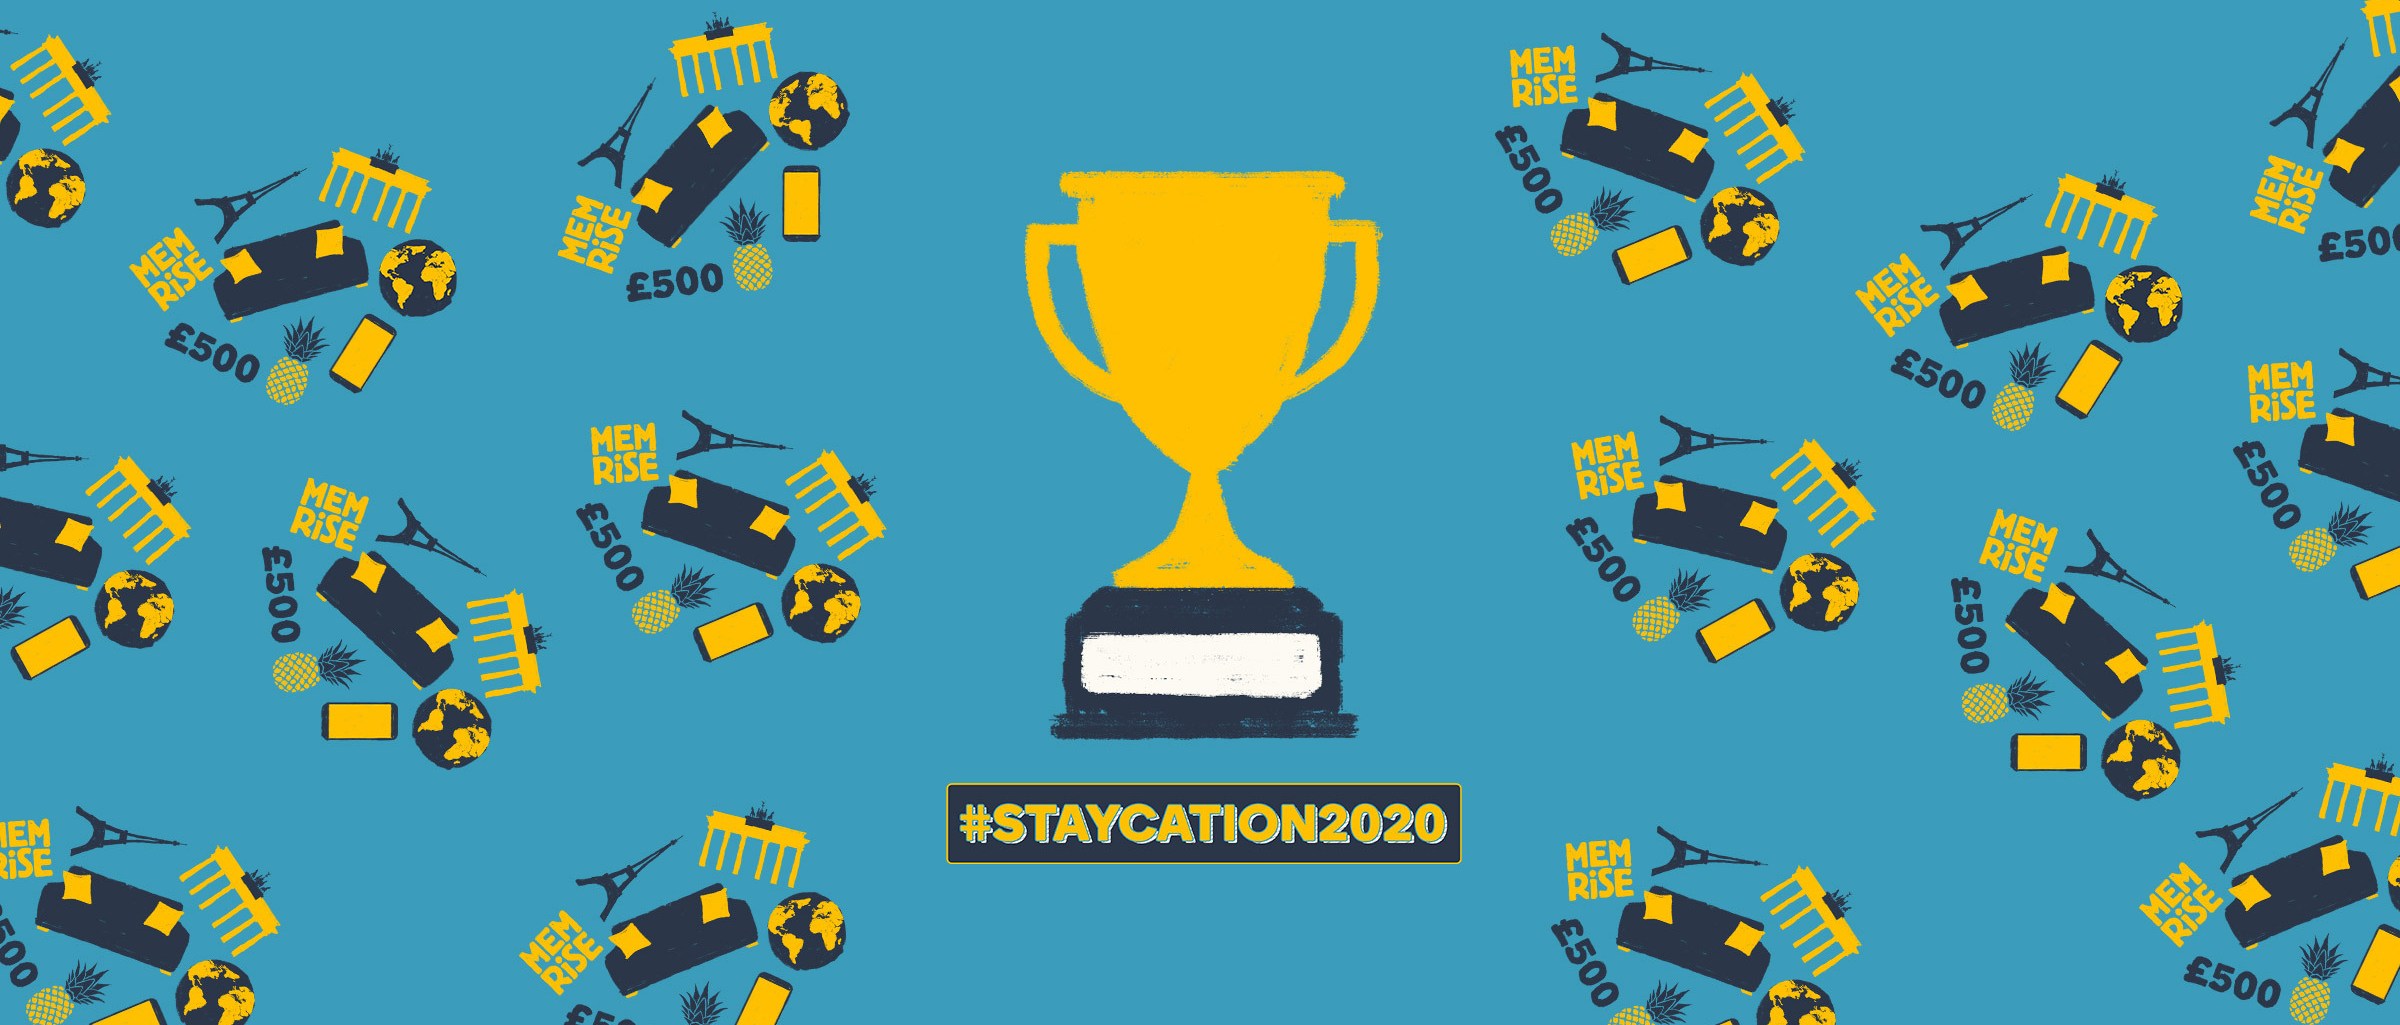 Staycation 2020 Competition Winners Announced!